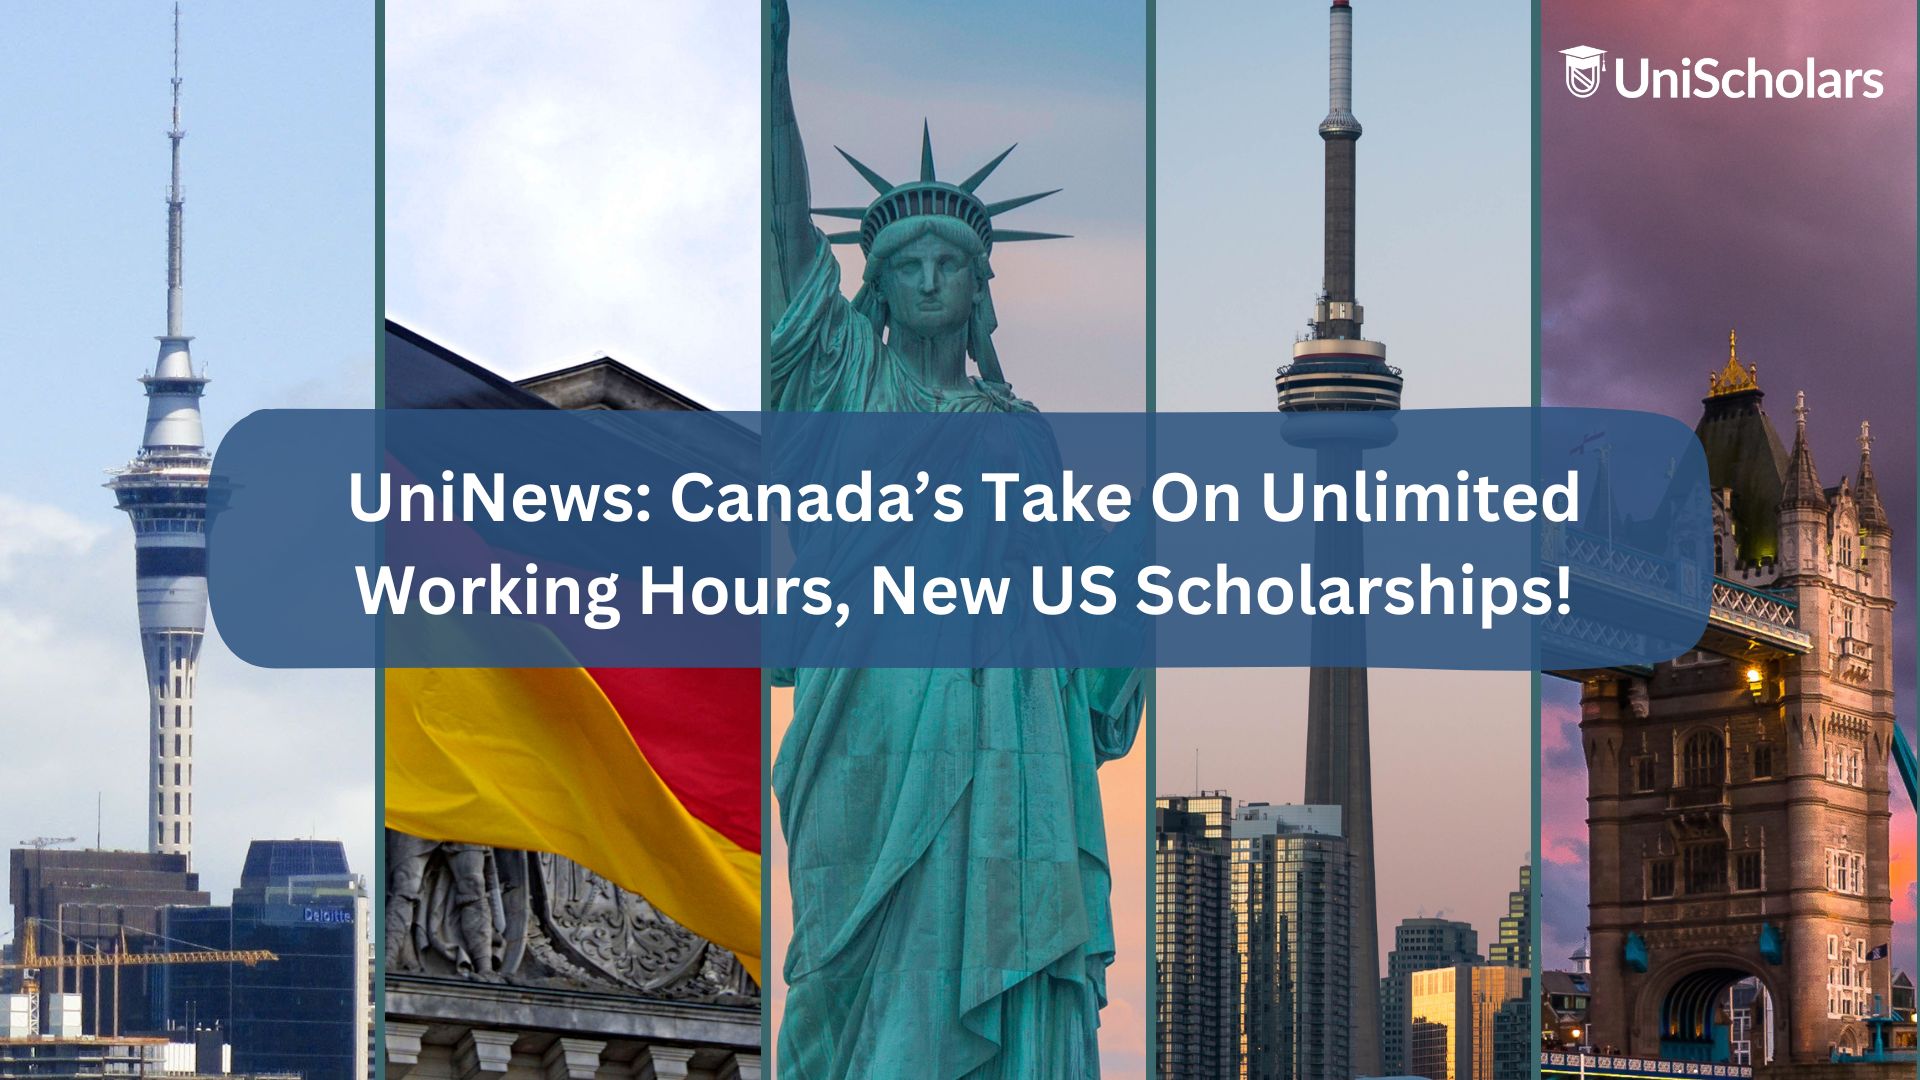 UniNews: Canada’s Take On Unlimited Working Hours, New US Scholarships!